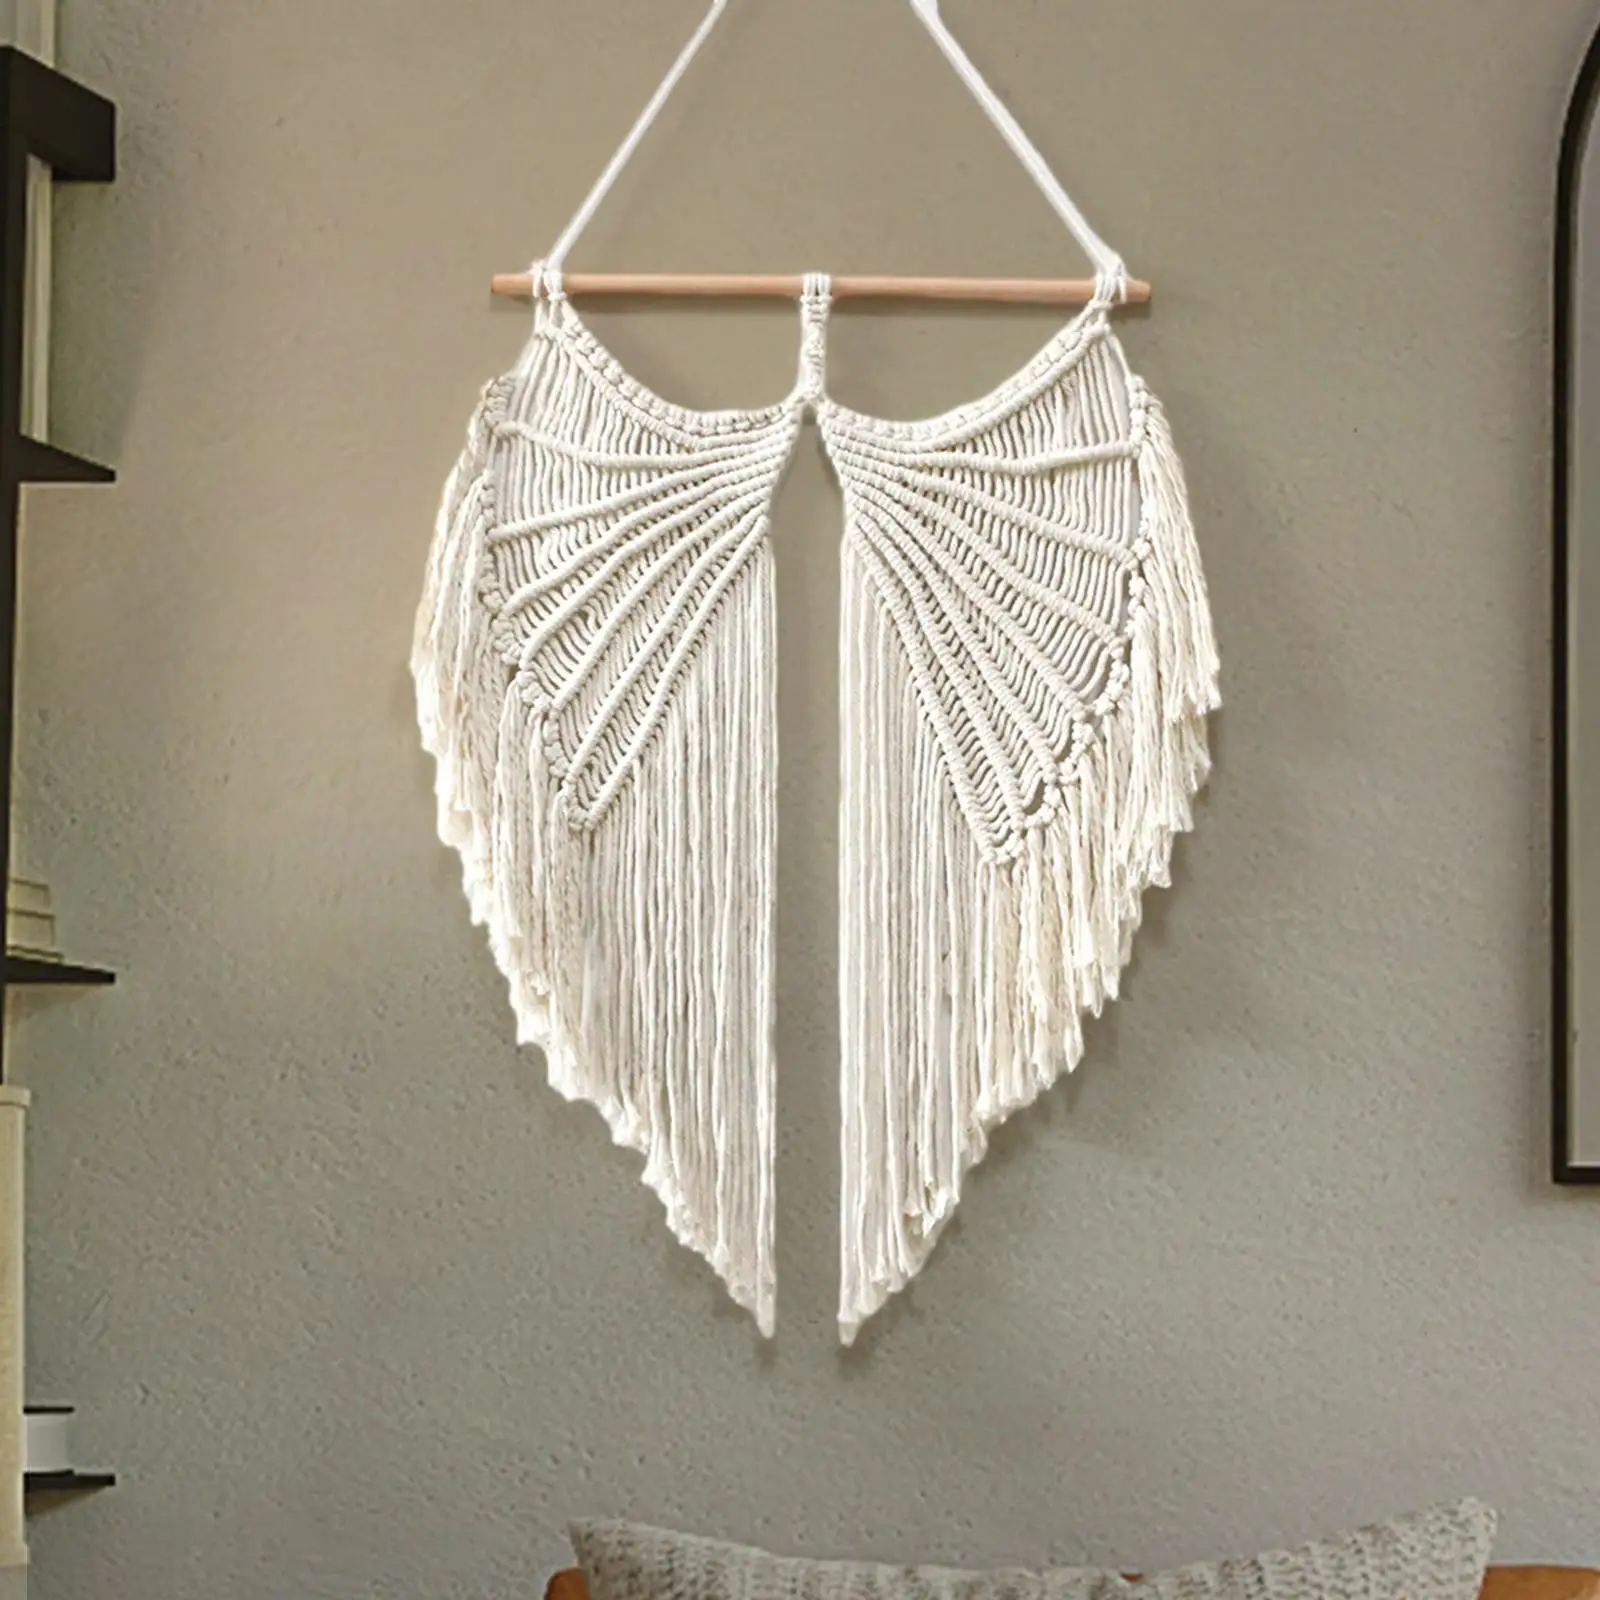 Macrame Wall Hanging Ornaments with Long Tassels Handmade Angel Wing Tapestry for Wedding Dorm Living Room Apartment Party